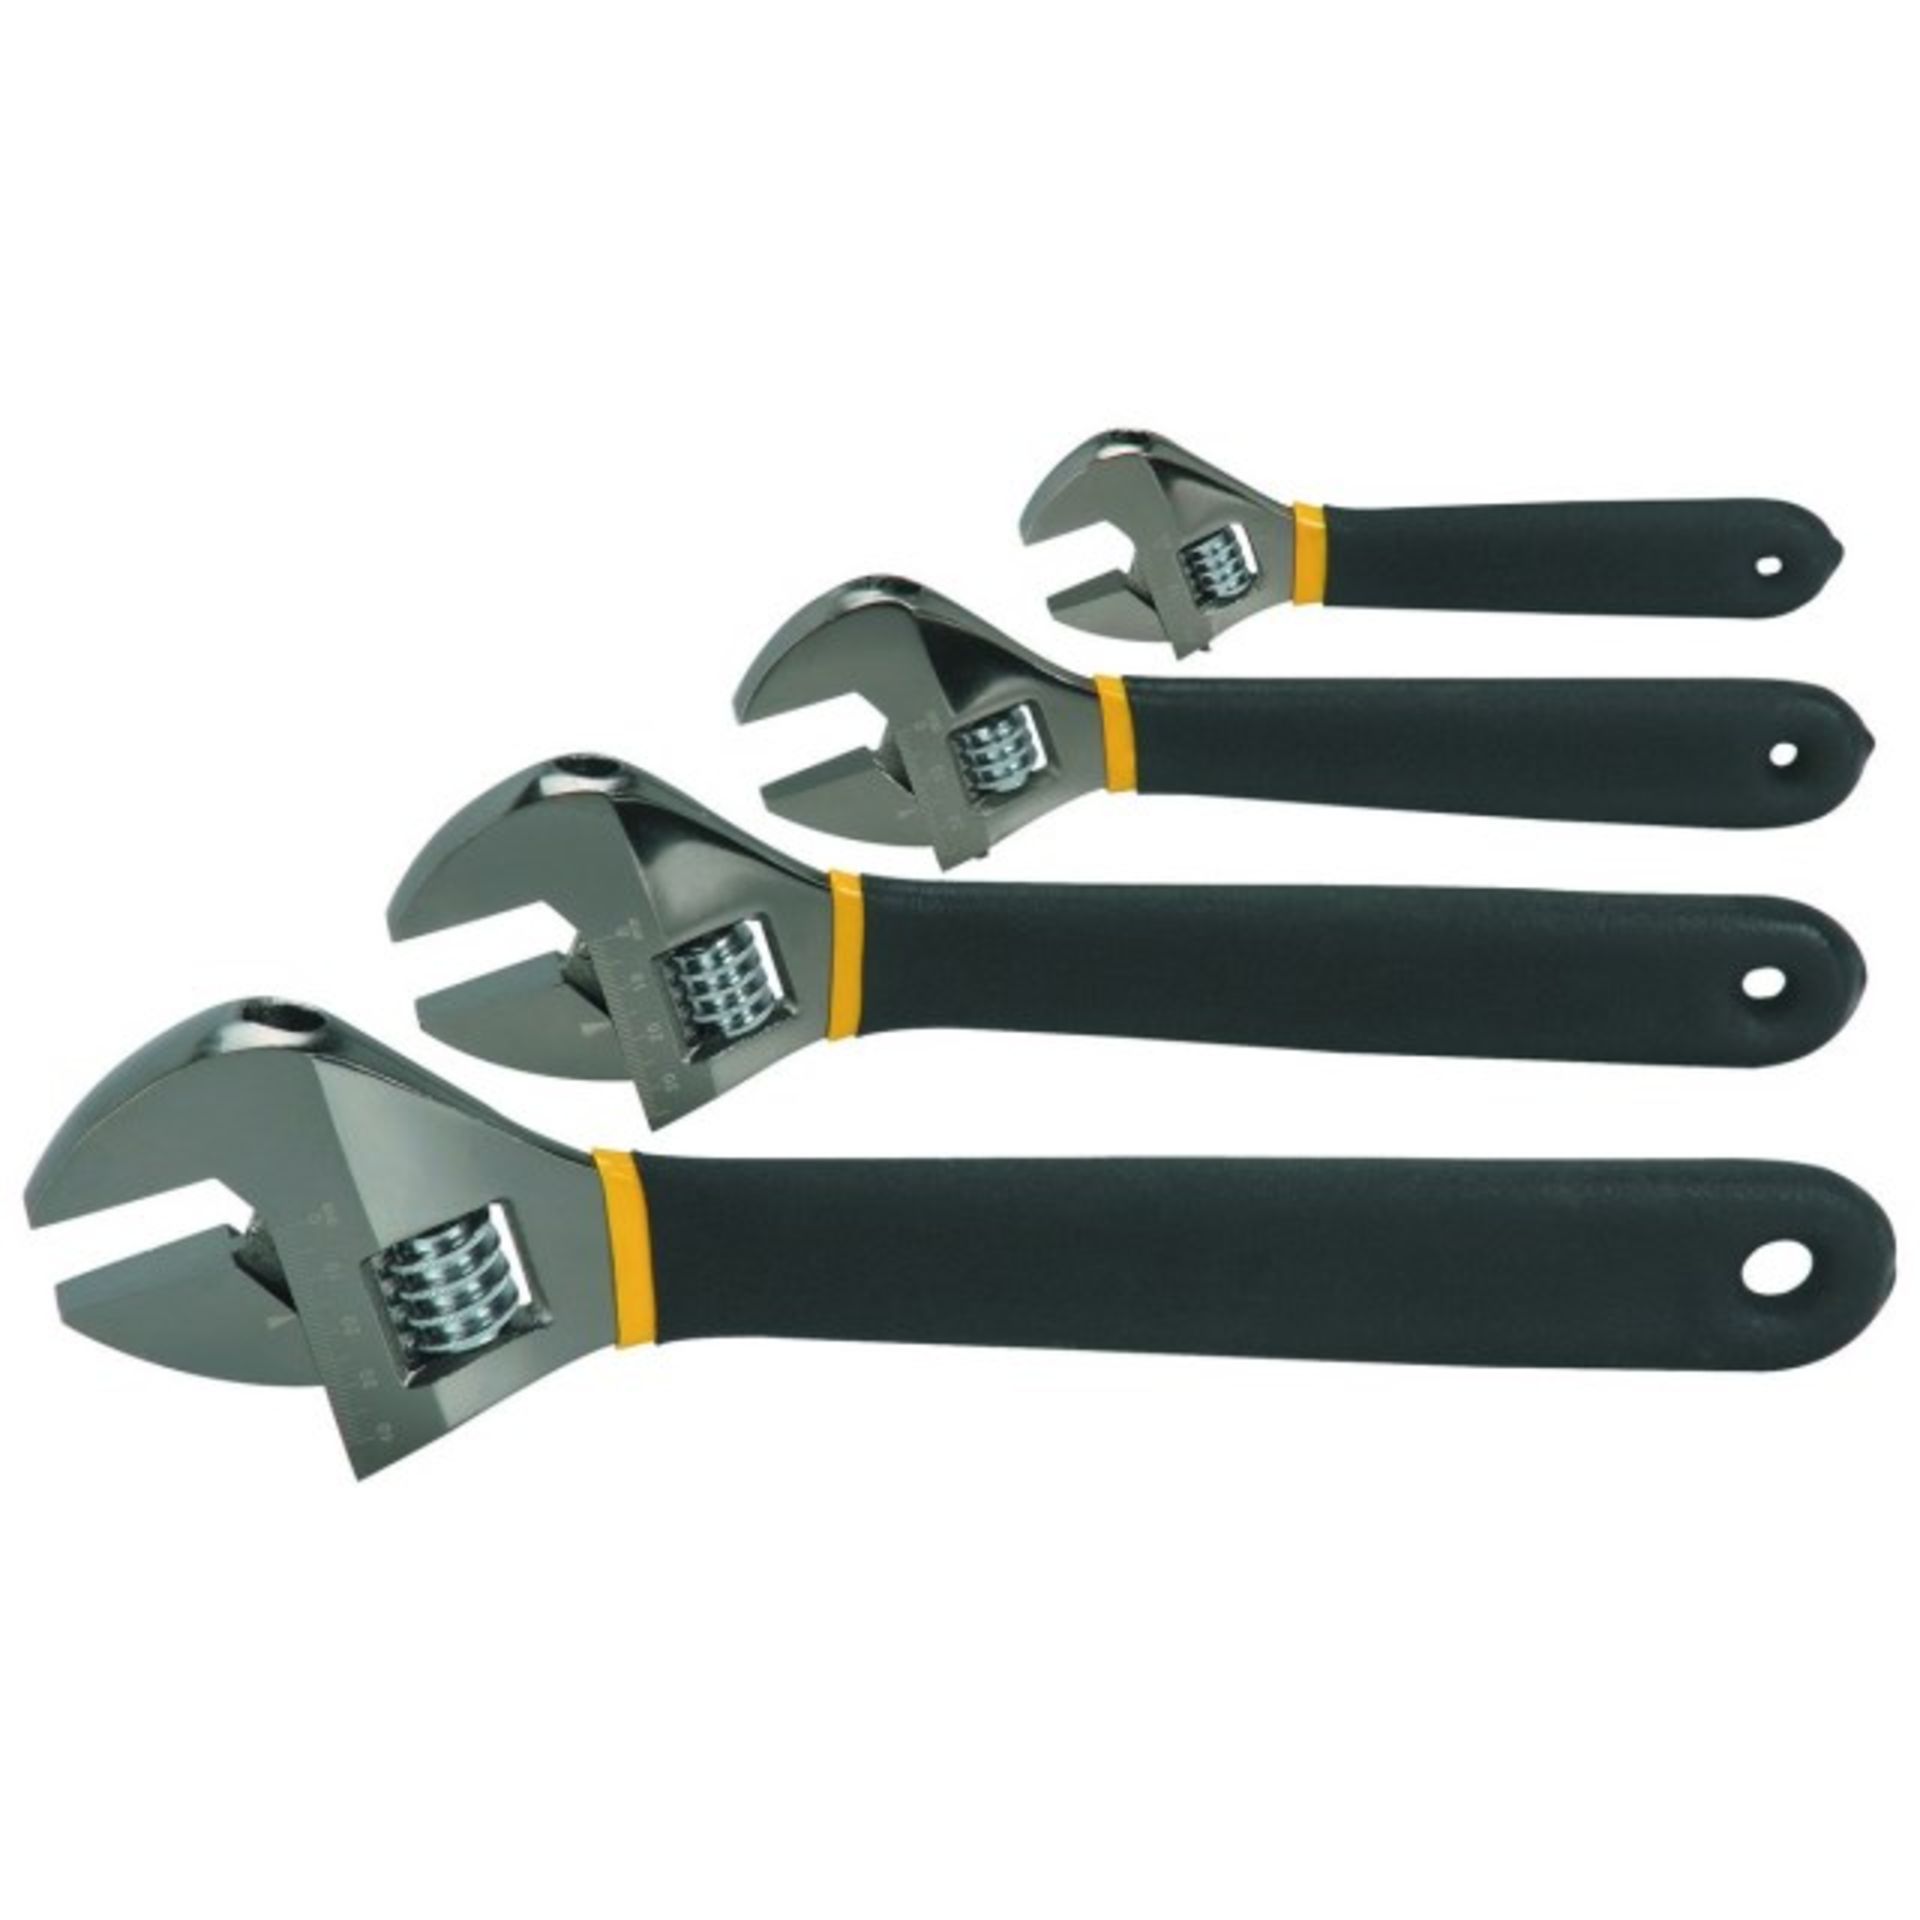 V *TRADE QTY* Brand New Large Four Piece Adjustable Spanner Set Up To 12 Inch X 10 YOUR BID PRICE TO